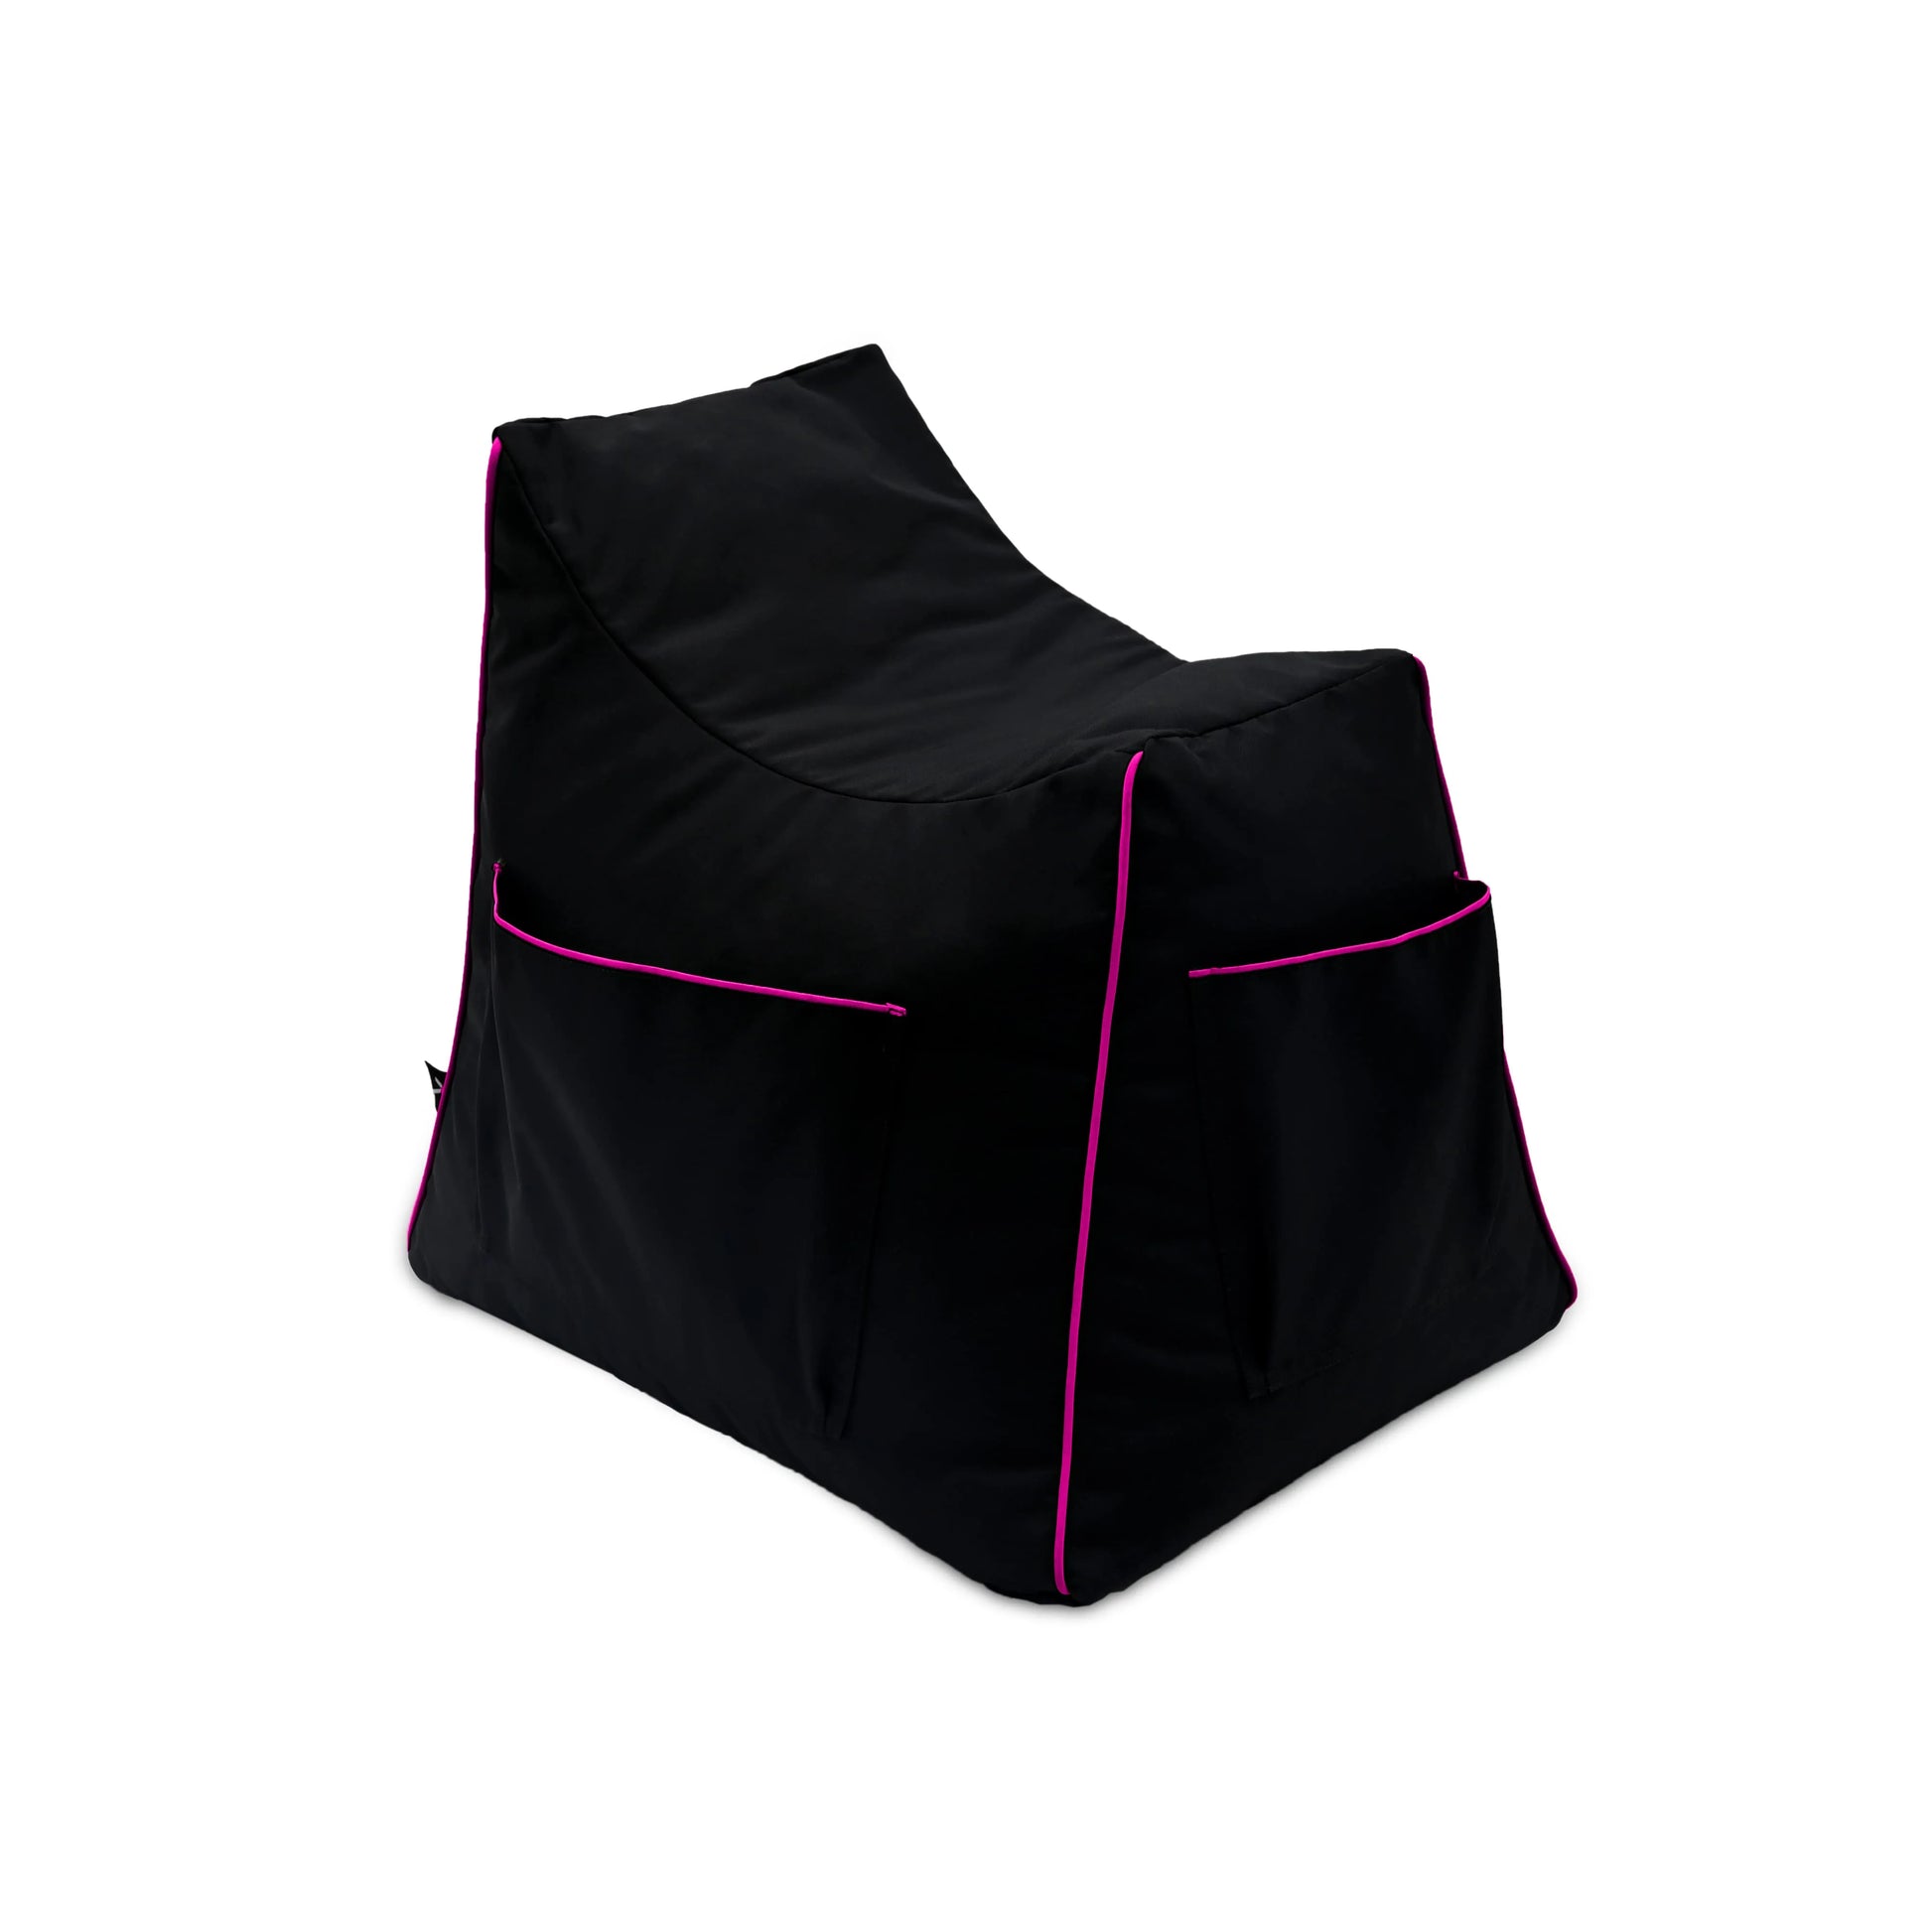 A black beanbag chair with a pink trim, adding a pop of color to your space.